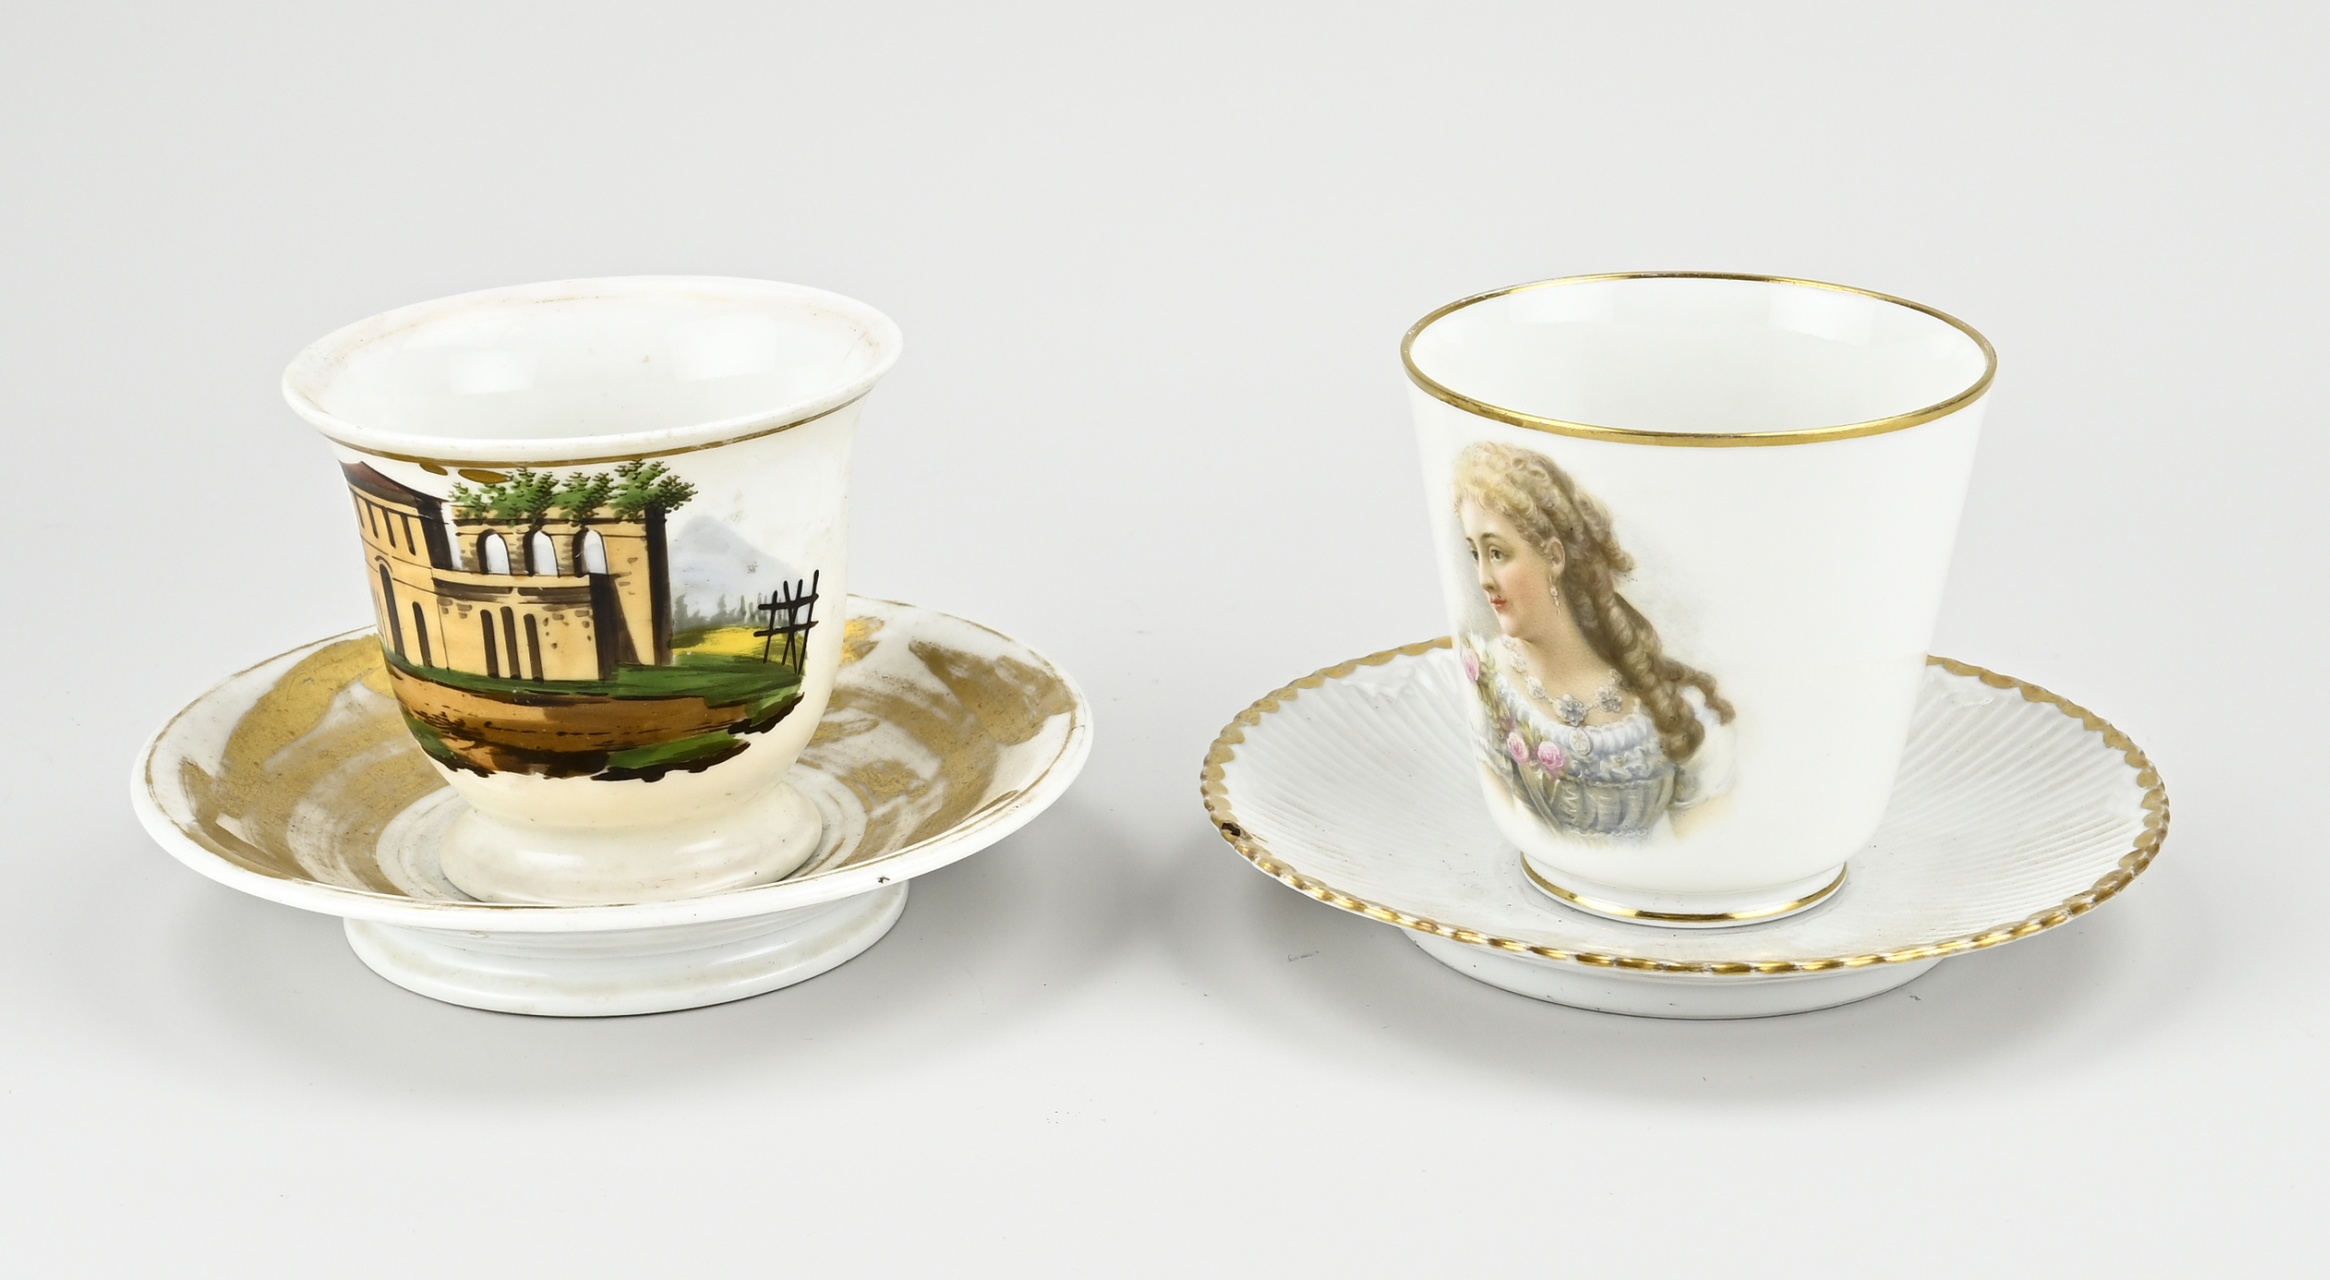 Two large 19th century porcelain cups + saucers. 19th century. France. Blind mark. 1x Ladies decor + 1x ruin/gold decor (worn).